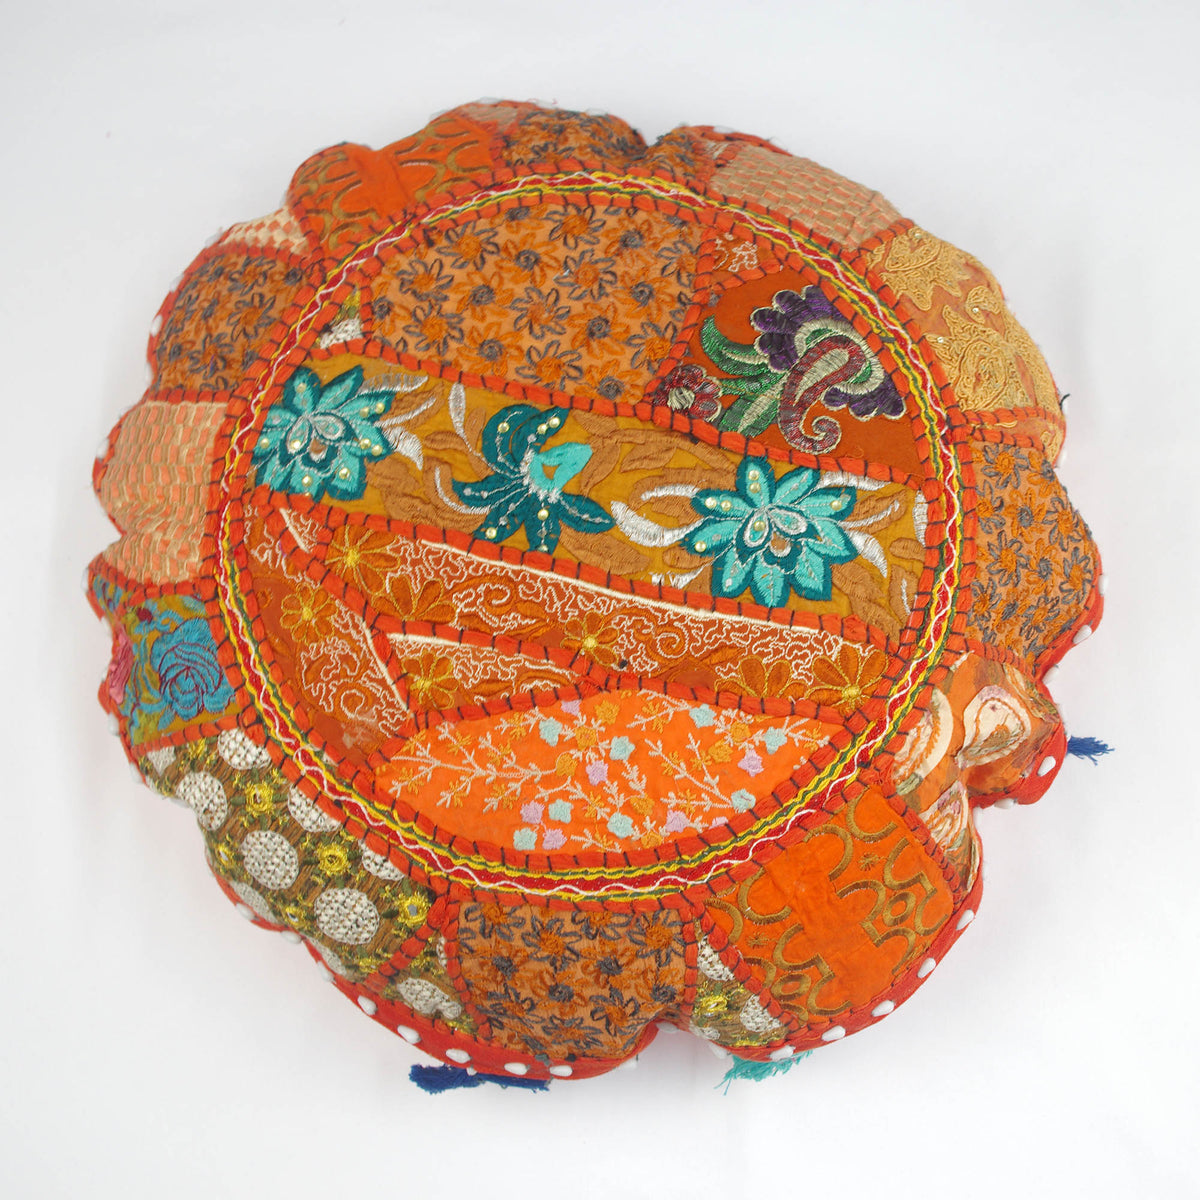 Orange With Teal Flowers Round Floor Embroidered Patchwork Pouf Ottoman Indian Vintage Cushion Cover 18"